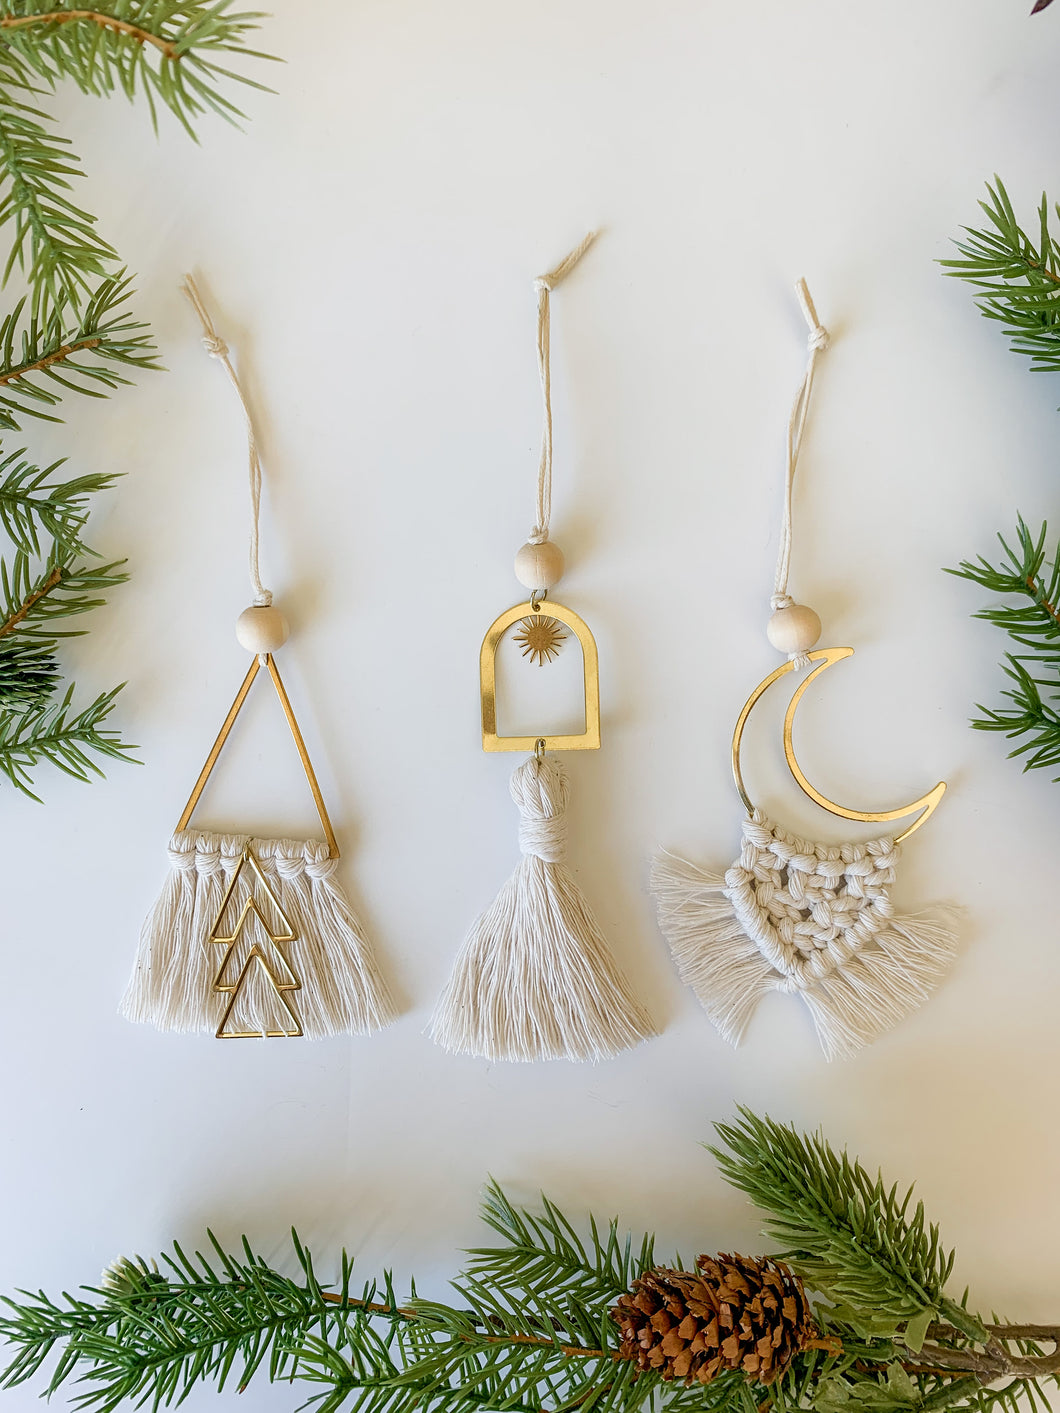 Three ornaments with brass rings in moon shape, triangle shape, and sunburst charm with macrame cord tassels. 